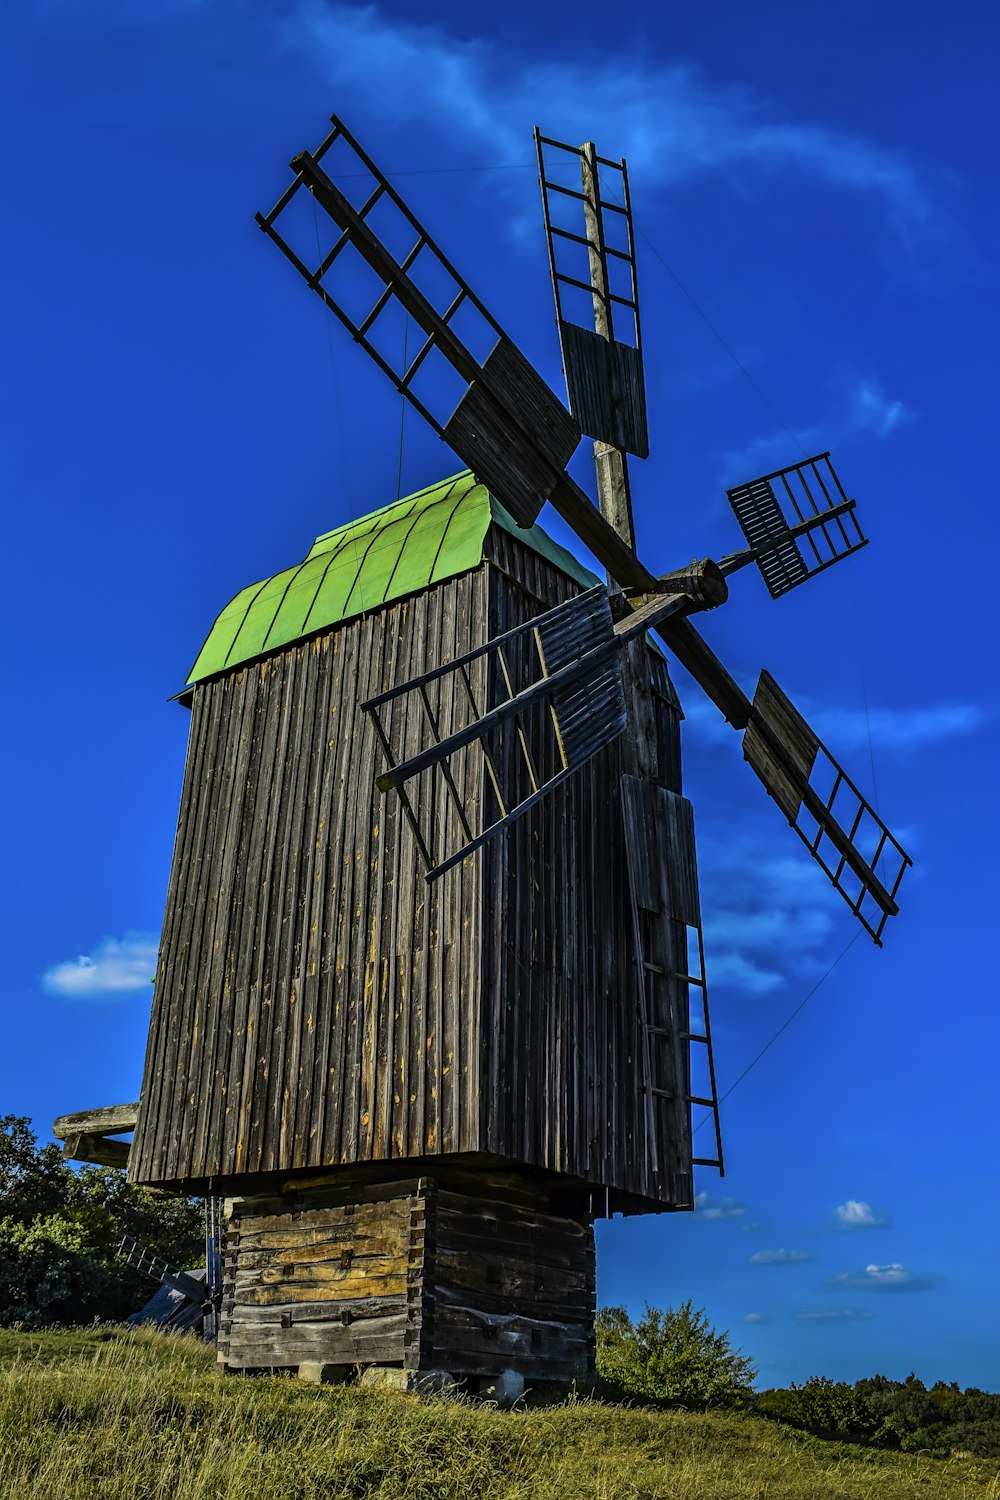 an old wooden windmill with a green roof